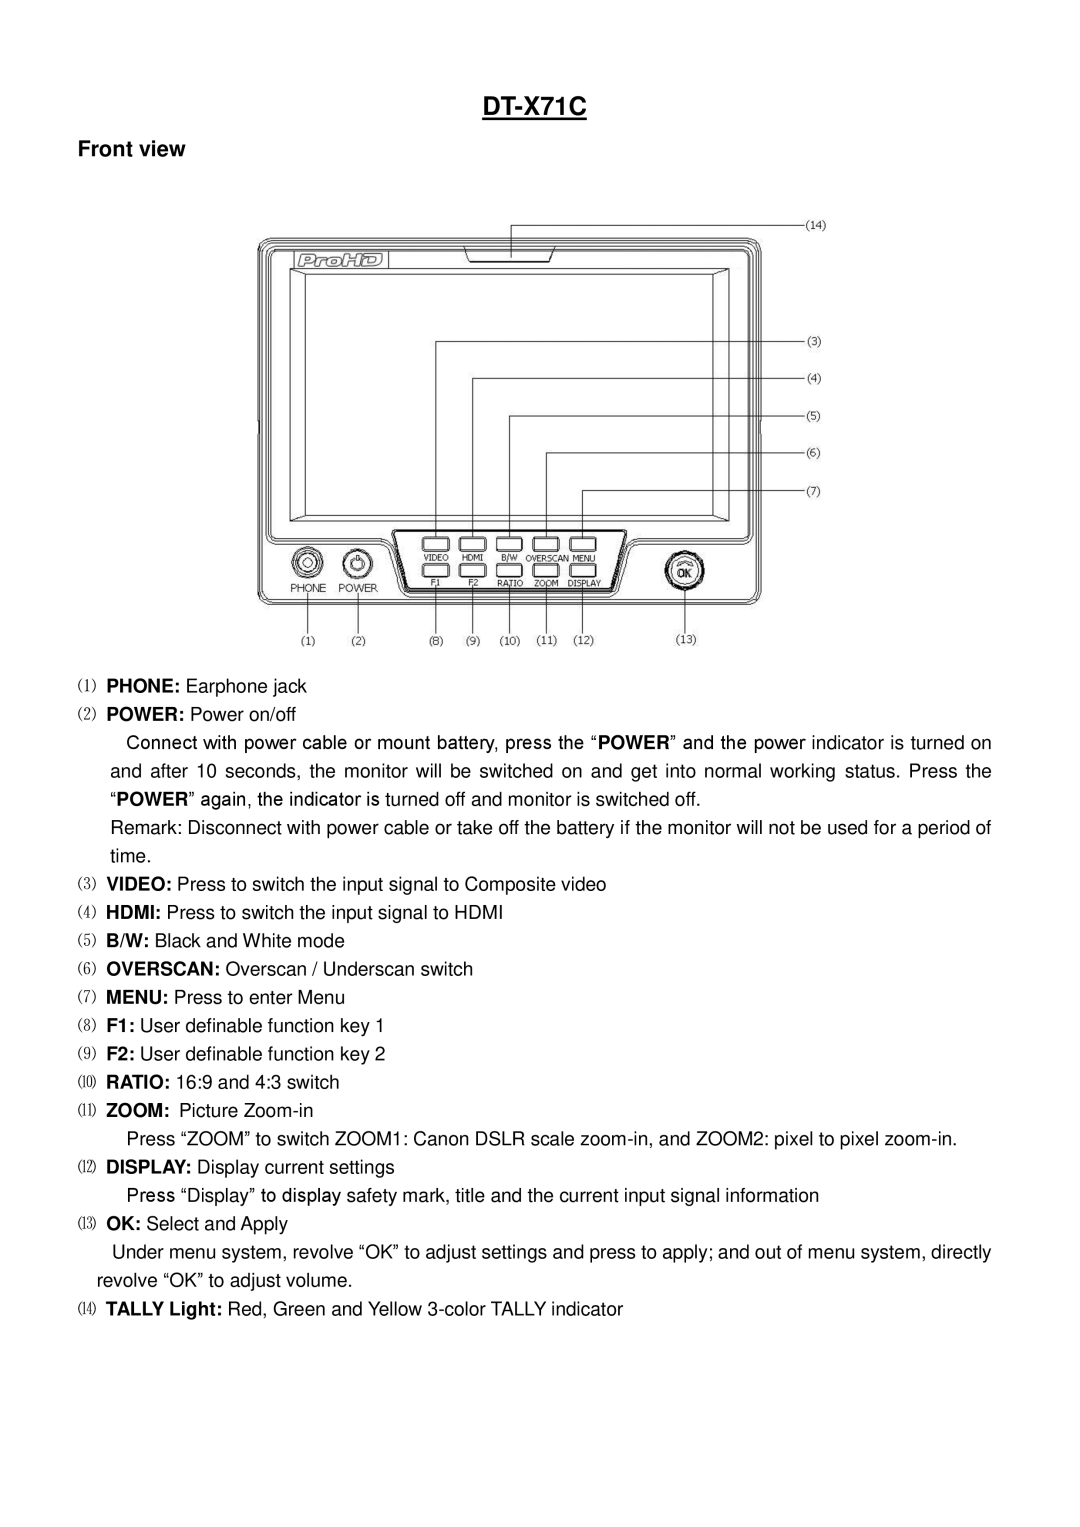 JVC DT-X71H, DTX71H, DT-X71F user manual DT-X71C, Front view 